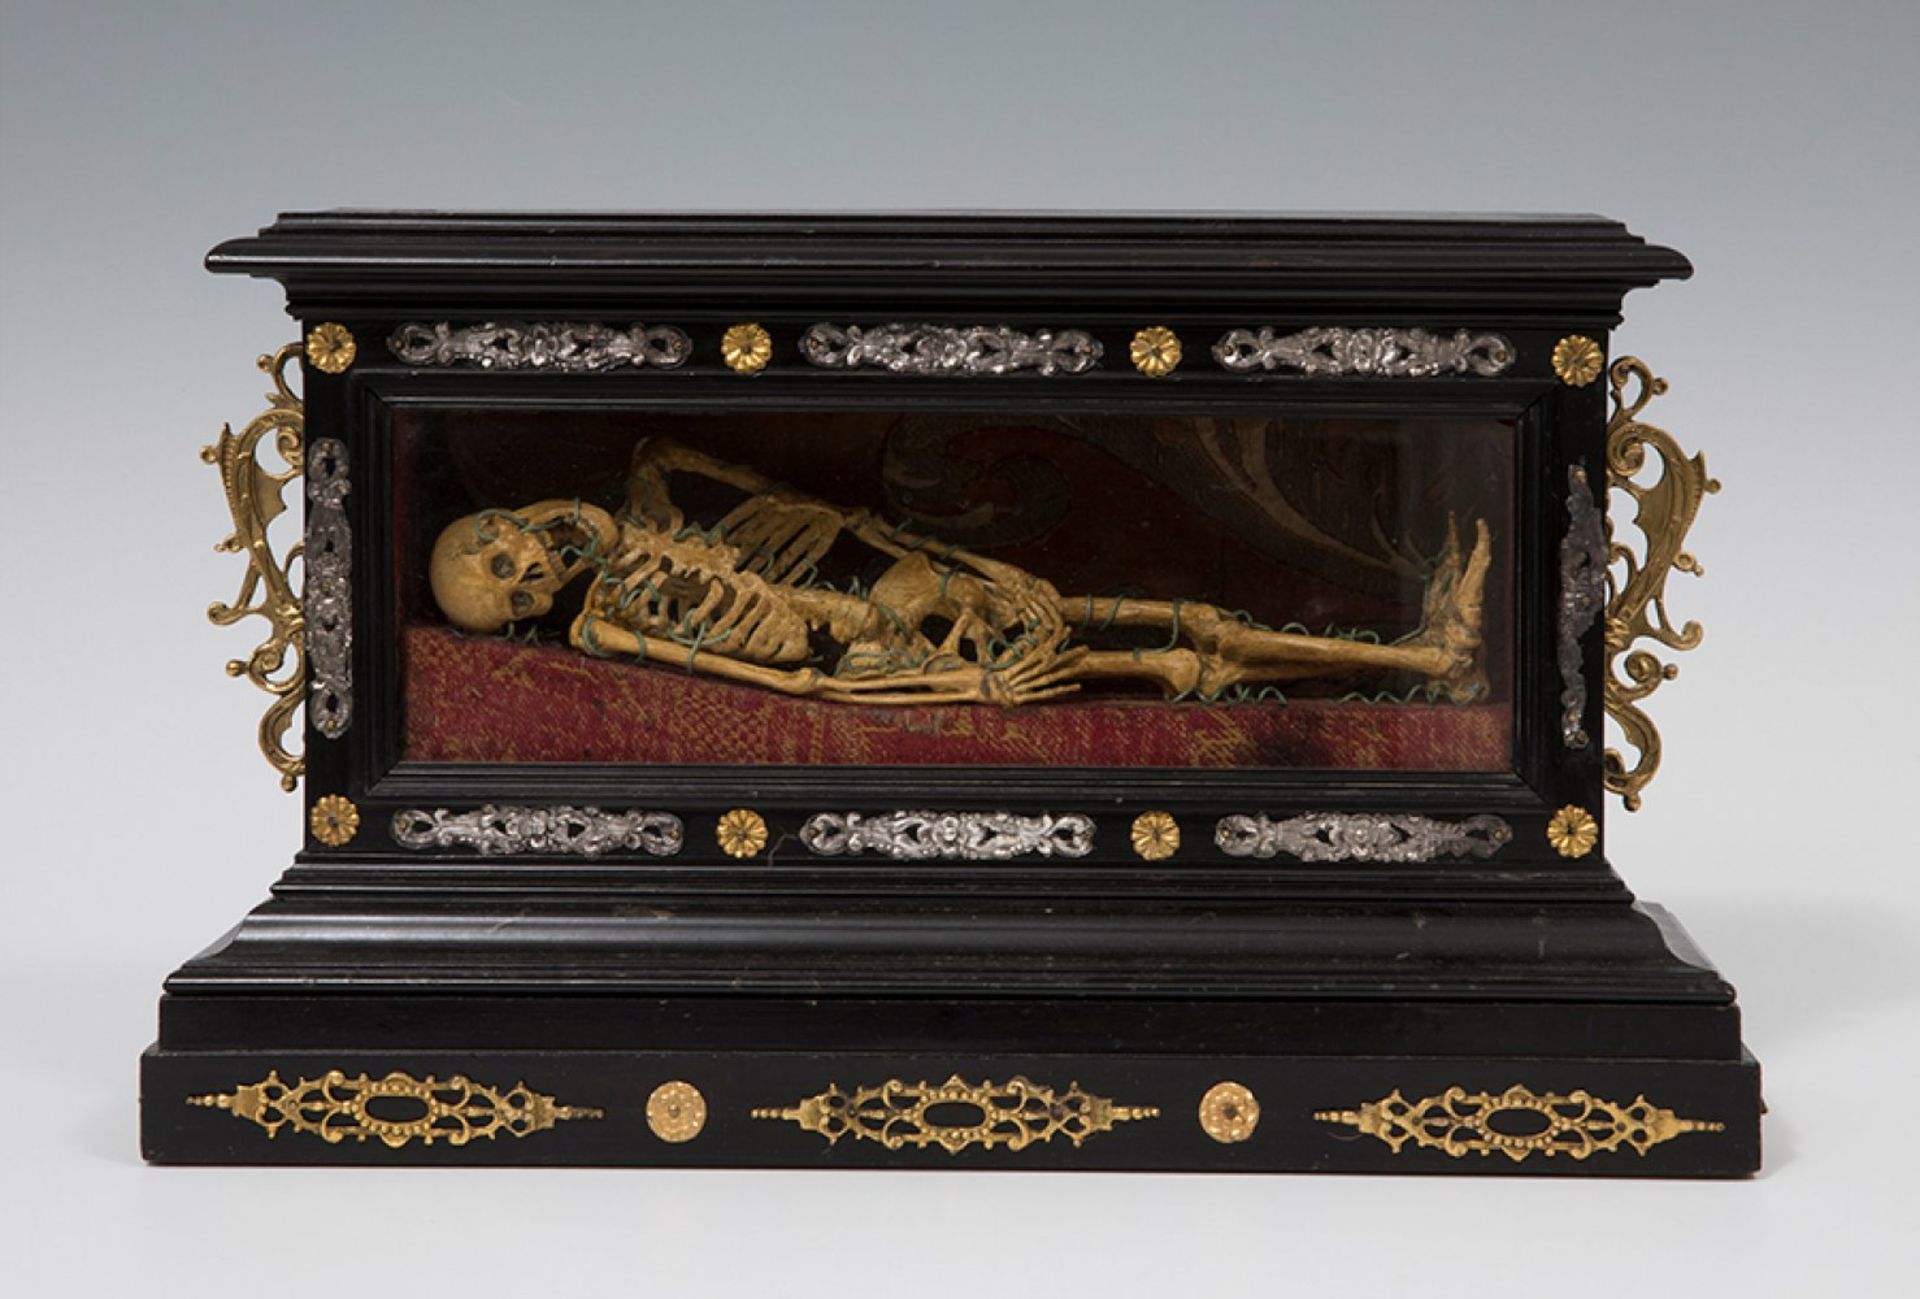 Italian school, 17th century."Vanitas".Carved and polychrome wood. Brass, bronze and silver. - Image 4 of 5